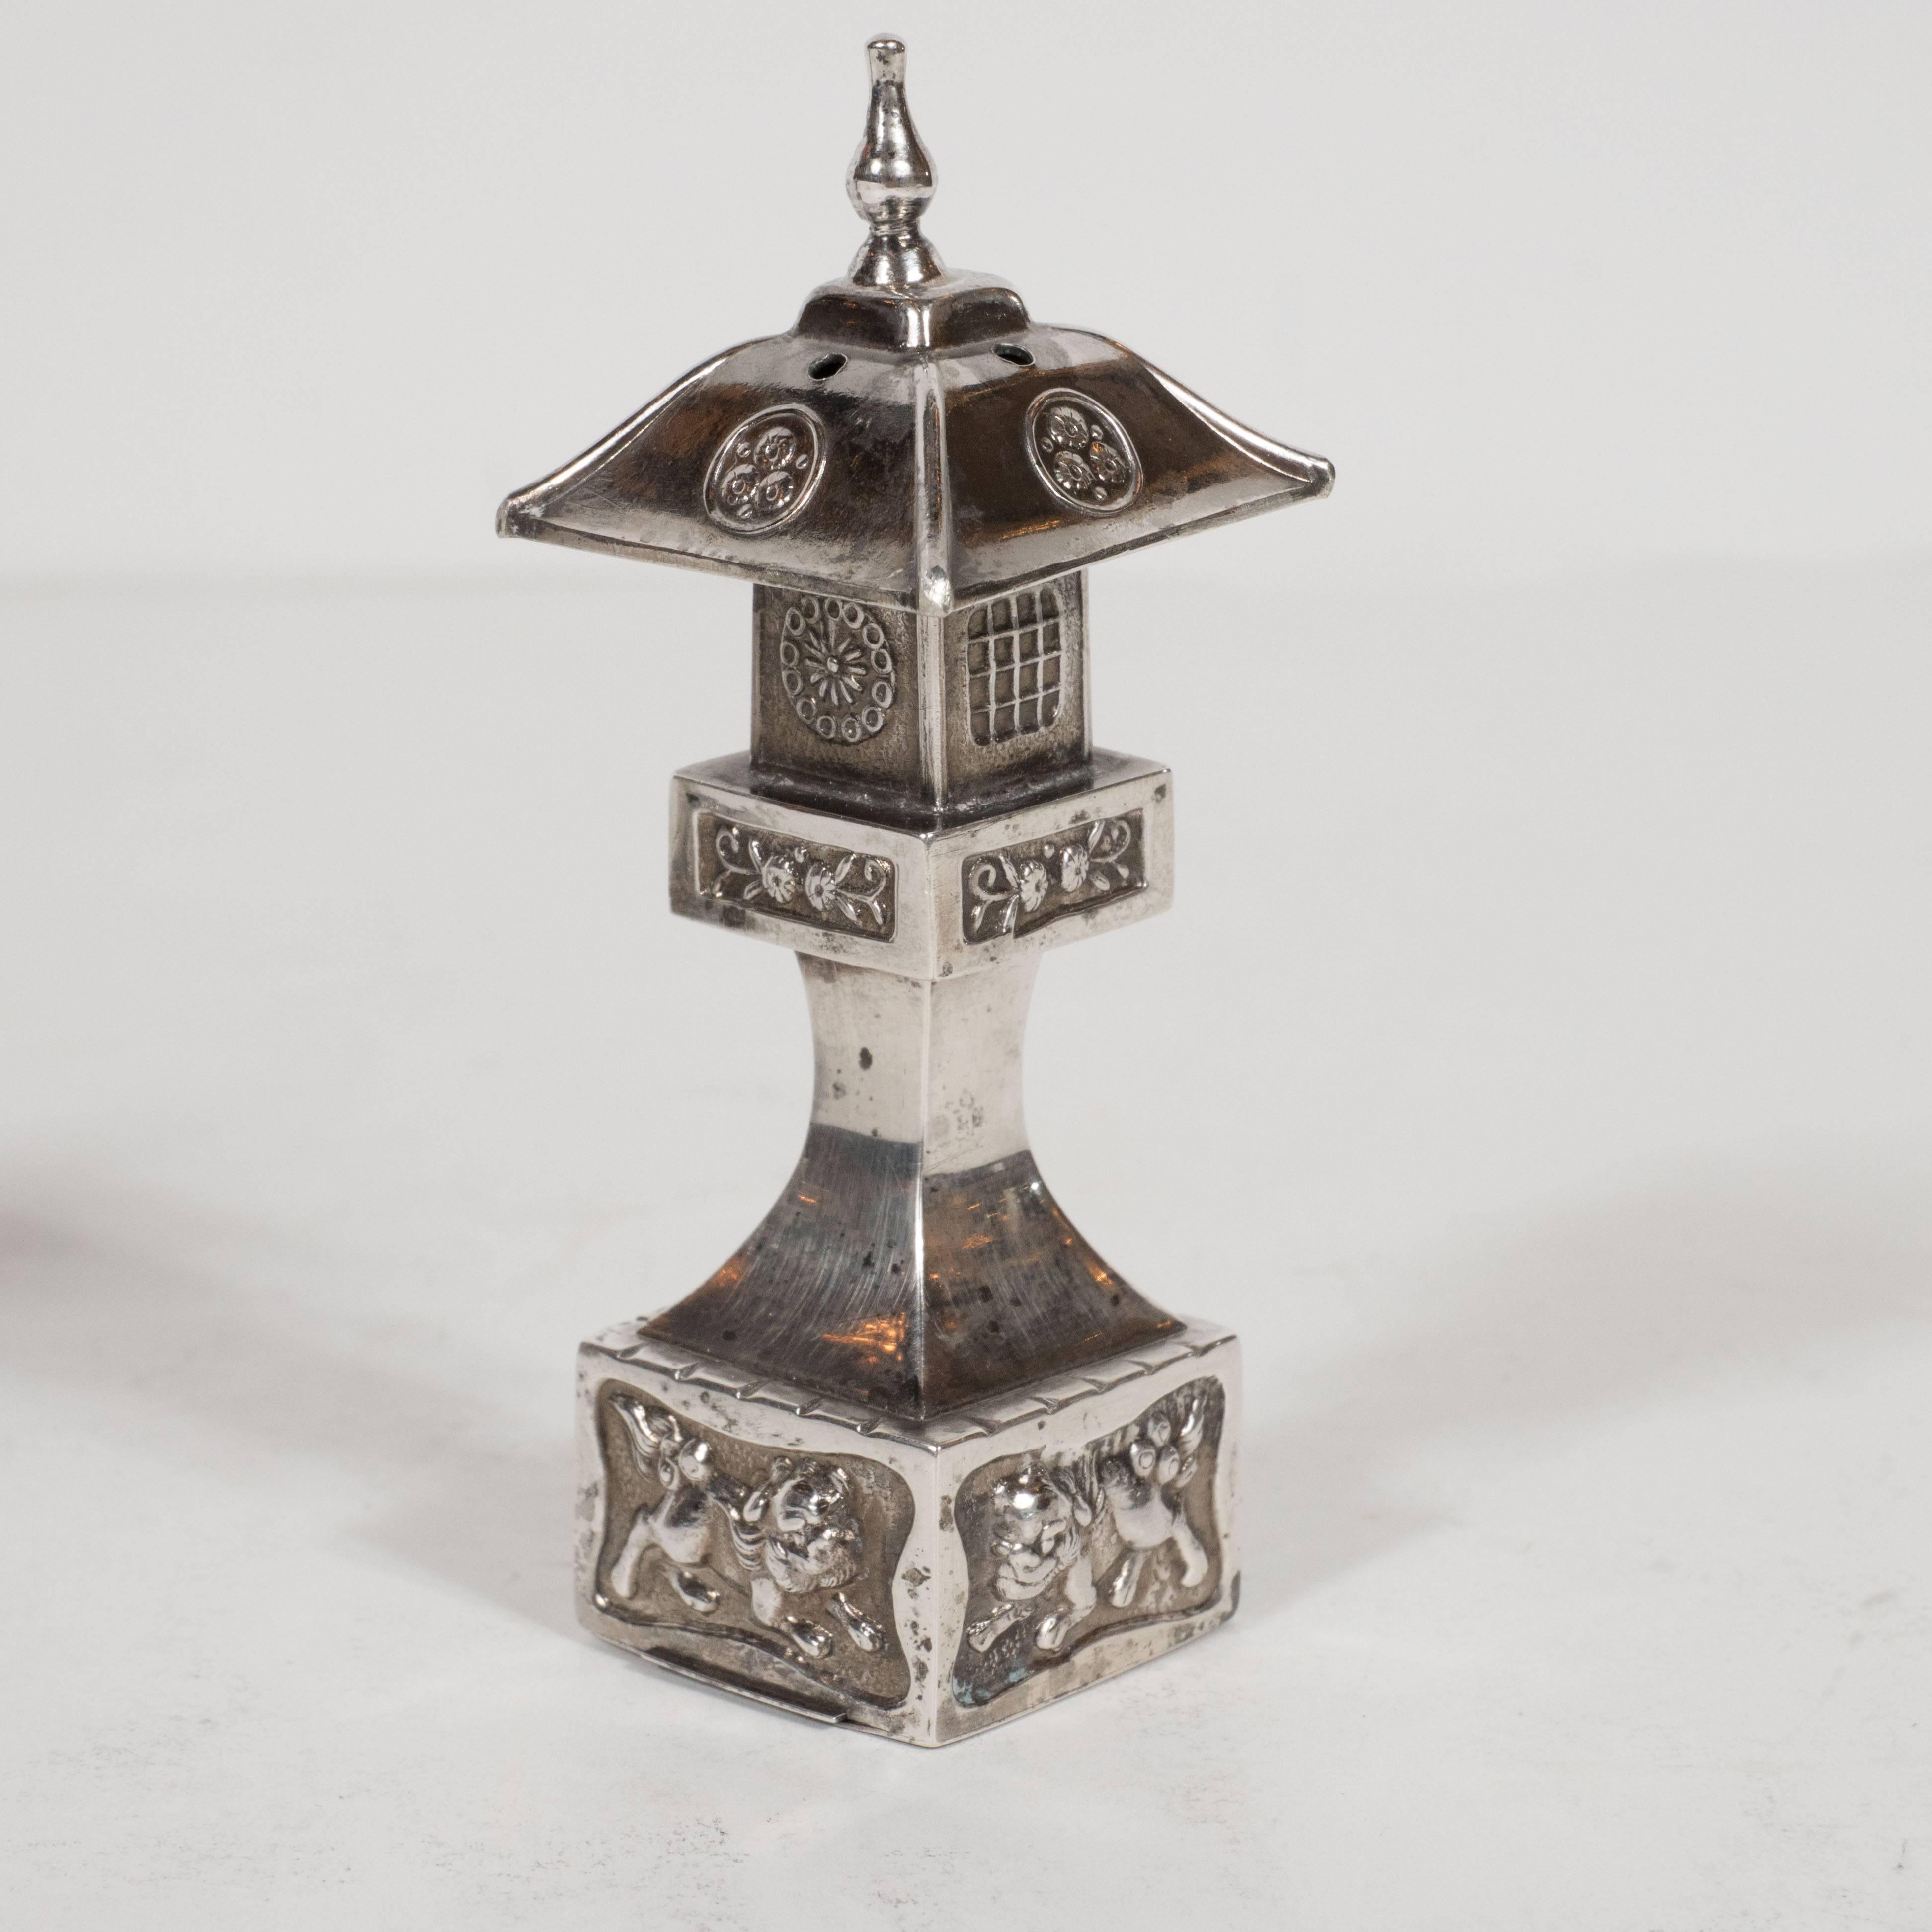 Composed of 25 grams of lustrous sterling silver, this pair of Pagoda style temple shakers feature decorative floral details and guardian lions inscribed at the base a traditional motif in Chinese temple architecture. They also boast a delicate